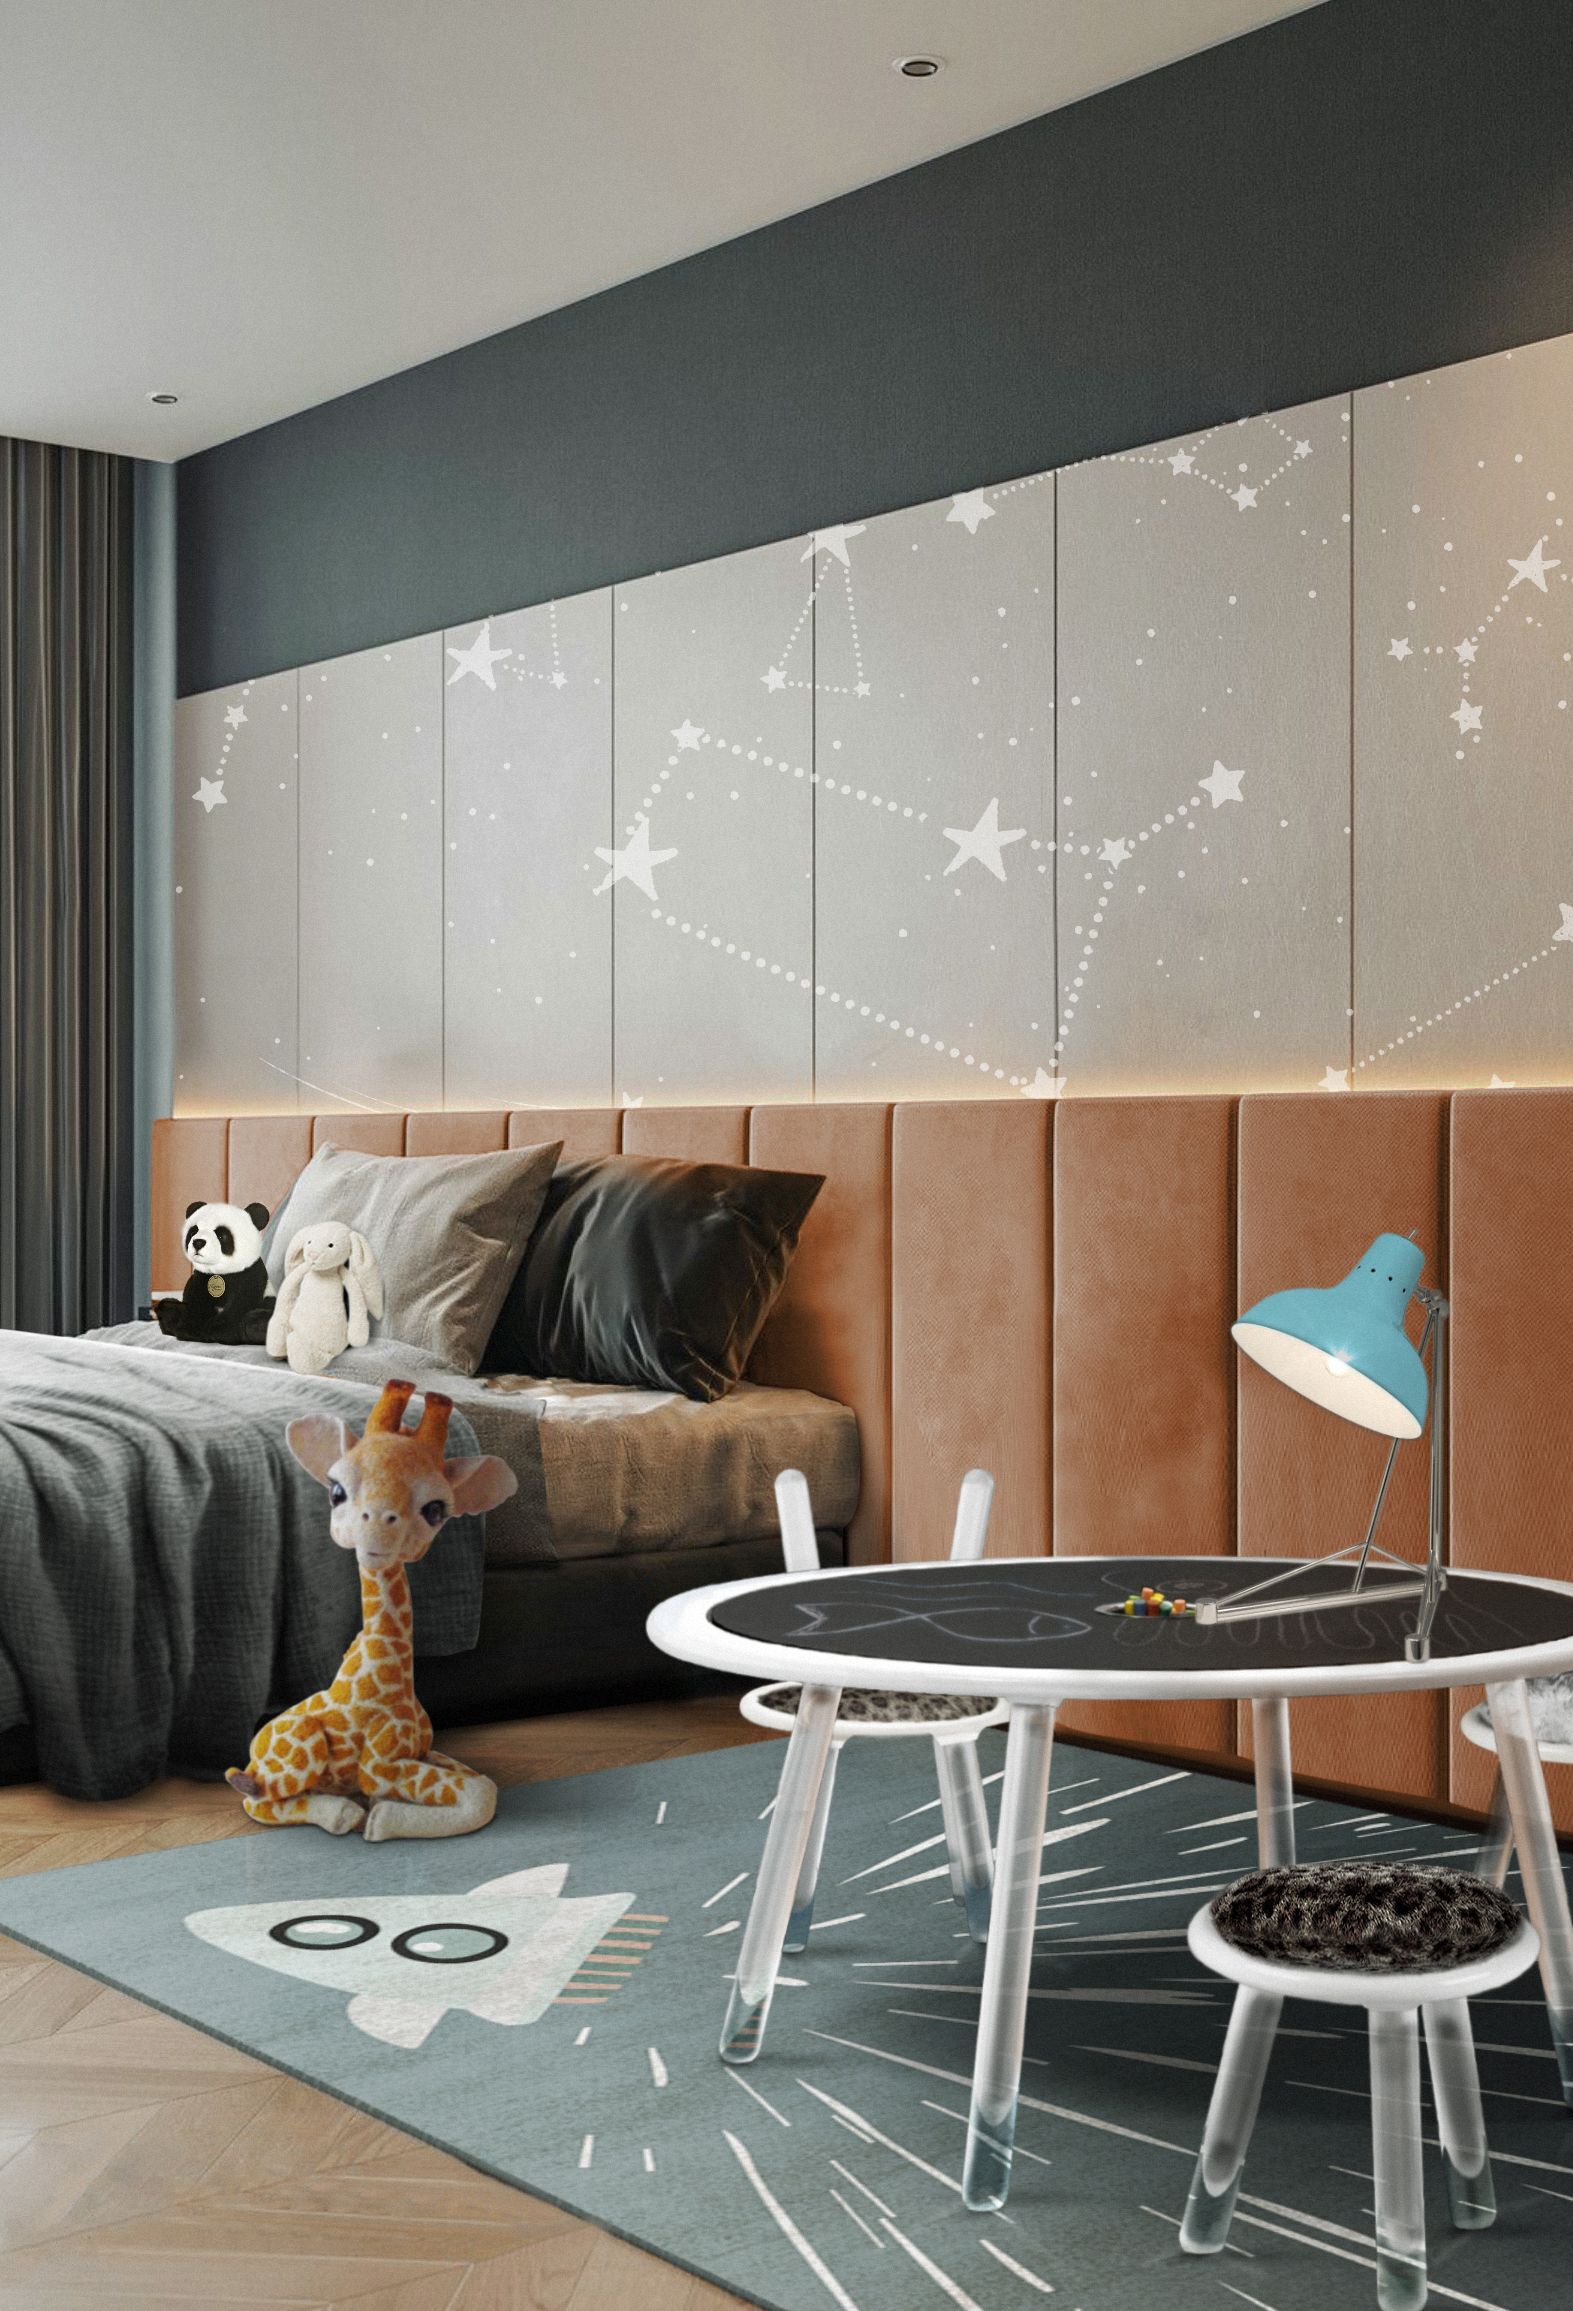 Kids Bedroom With Space Greatness Inspiration By The Thunder Rocket Rug by Rug'Society